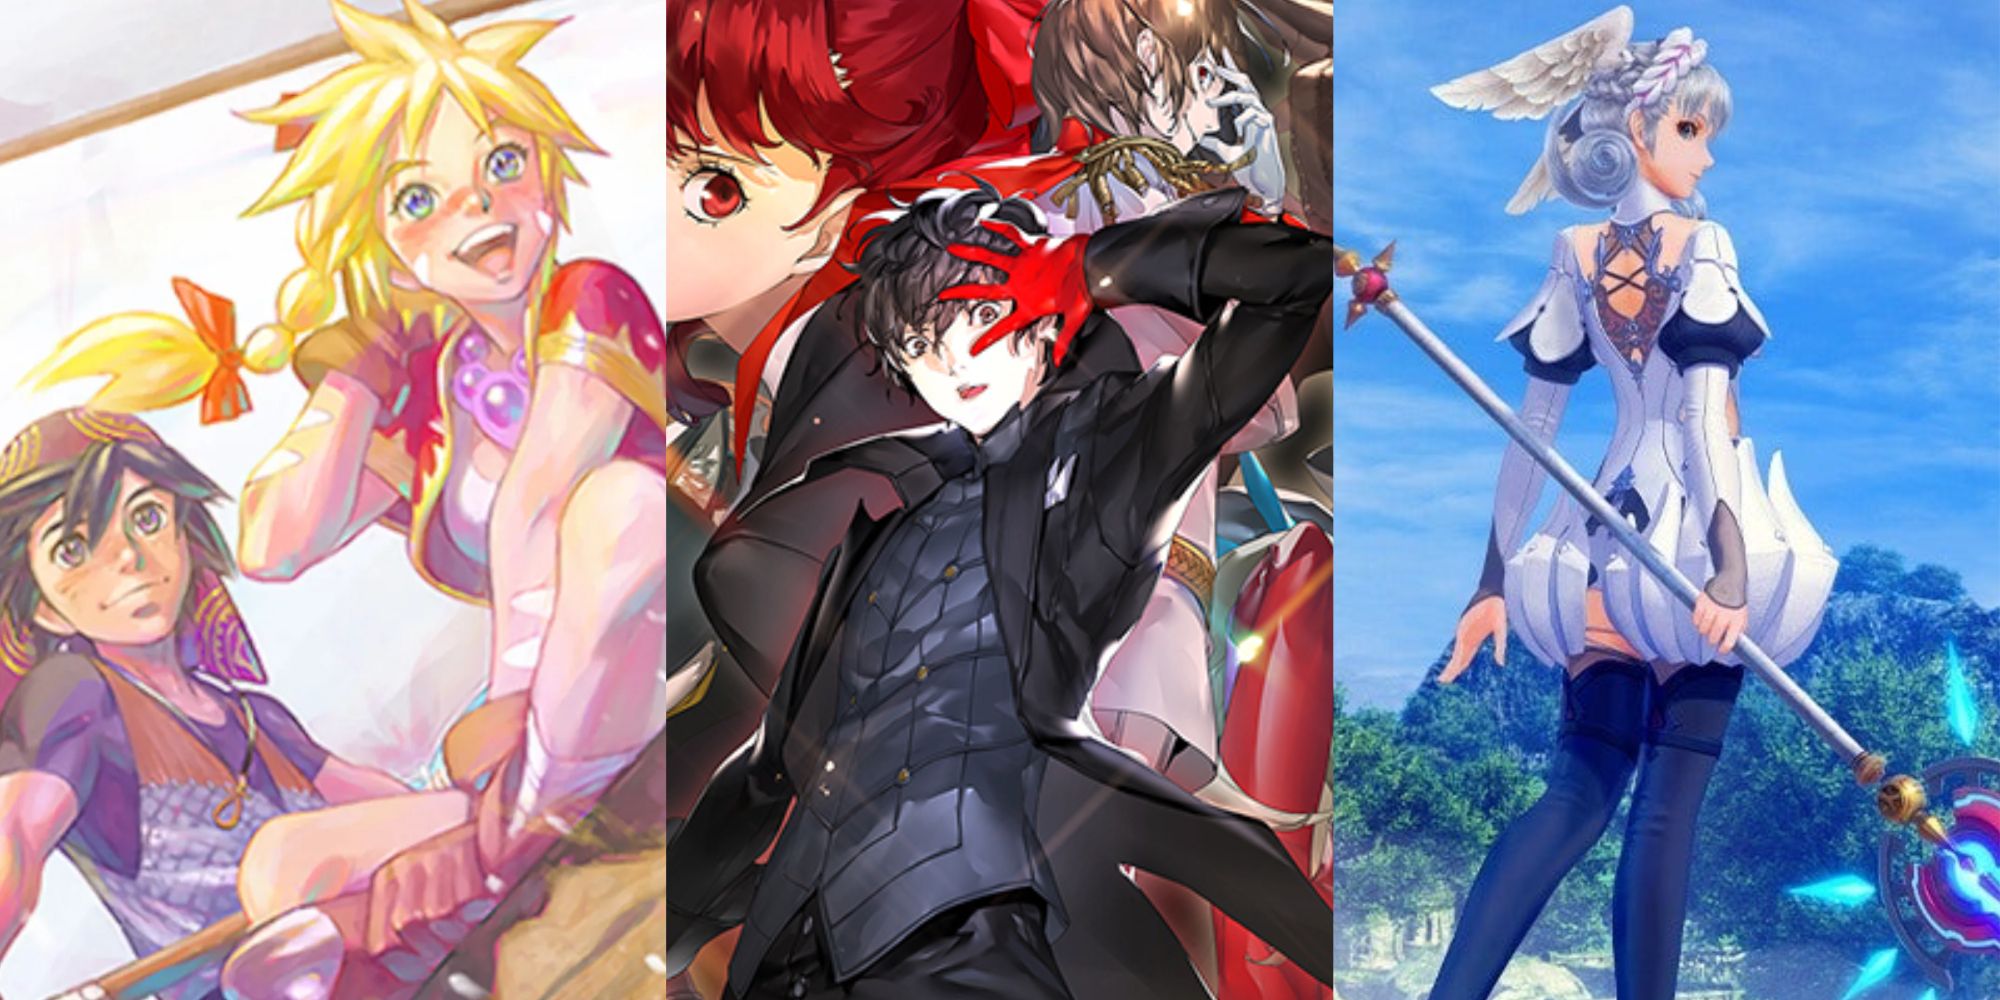 Serge and Kid riding smiling and riding a boat, Joker posing in front of his teammates, and Melia holding her spear with her back slightly turned